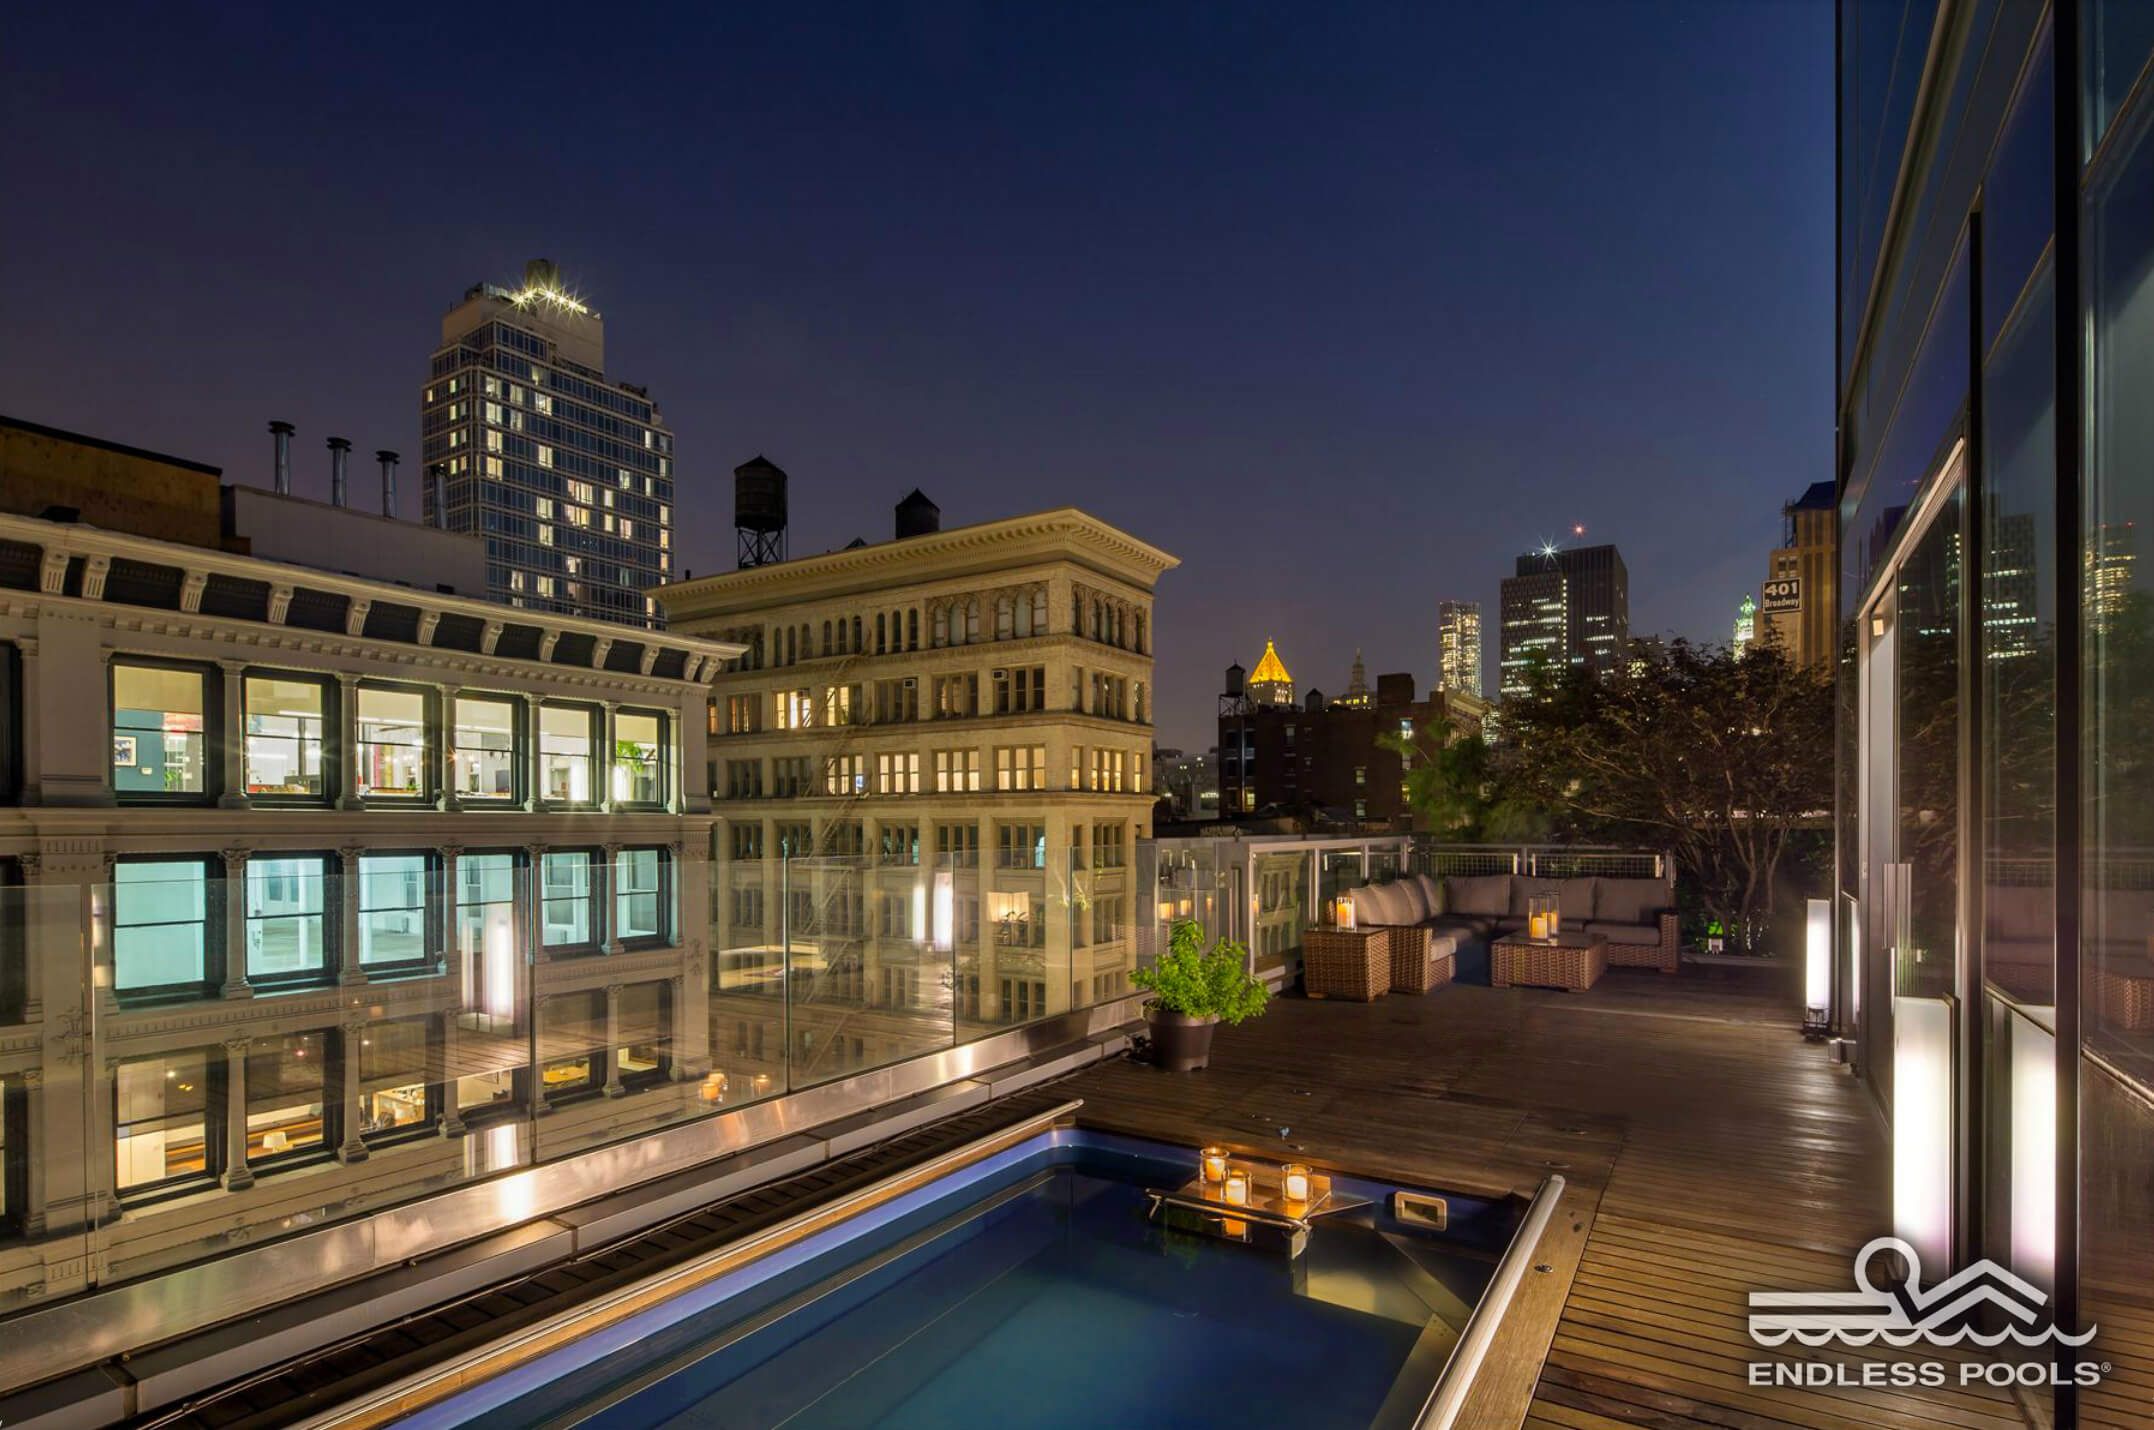 a rooftop Endless Pool at night in New York City's SoHo district